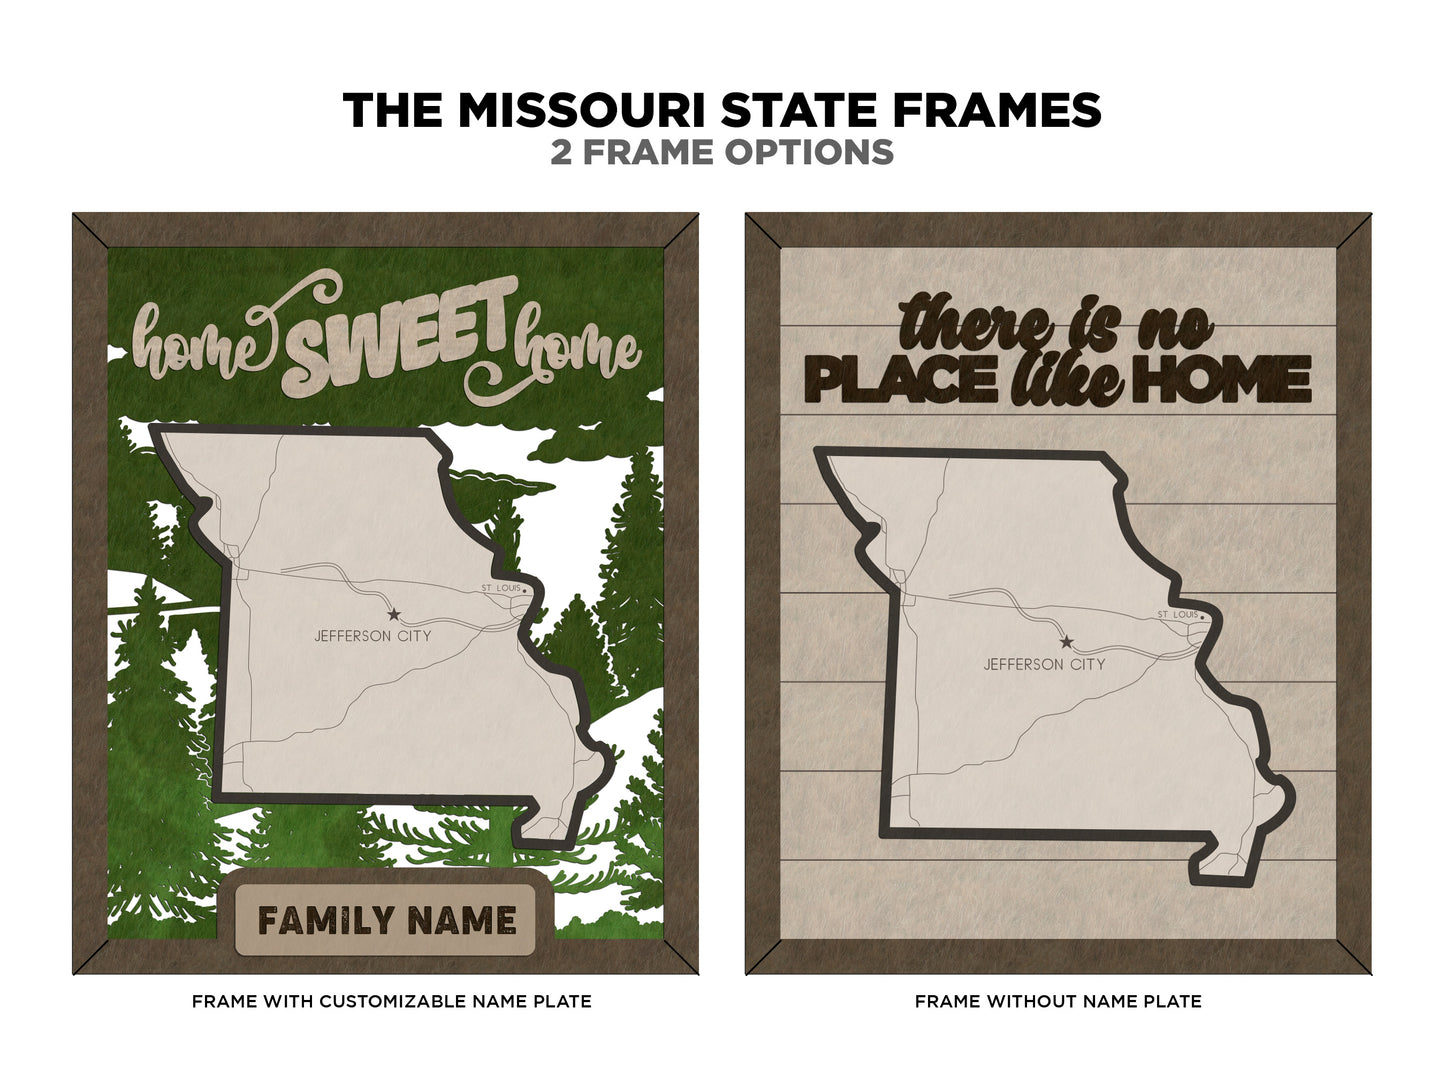 The Missouri State Frame - 13 text options, 12 backgrounds, 25 icons Included - Make over 7,500 designs - Glowforge & Lightburn Tested